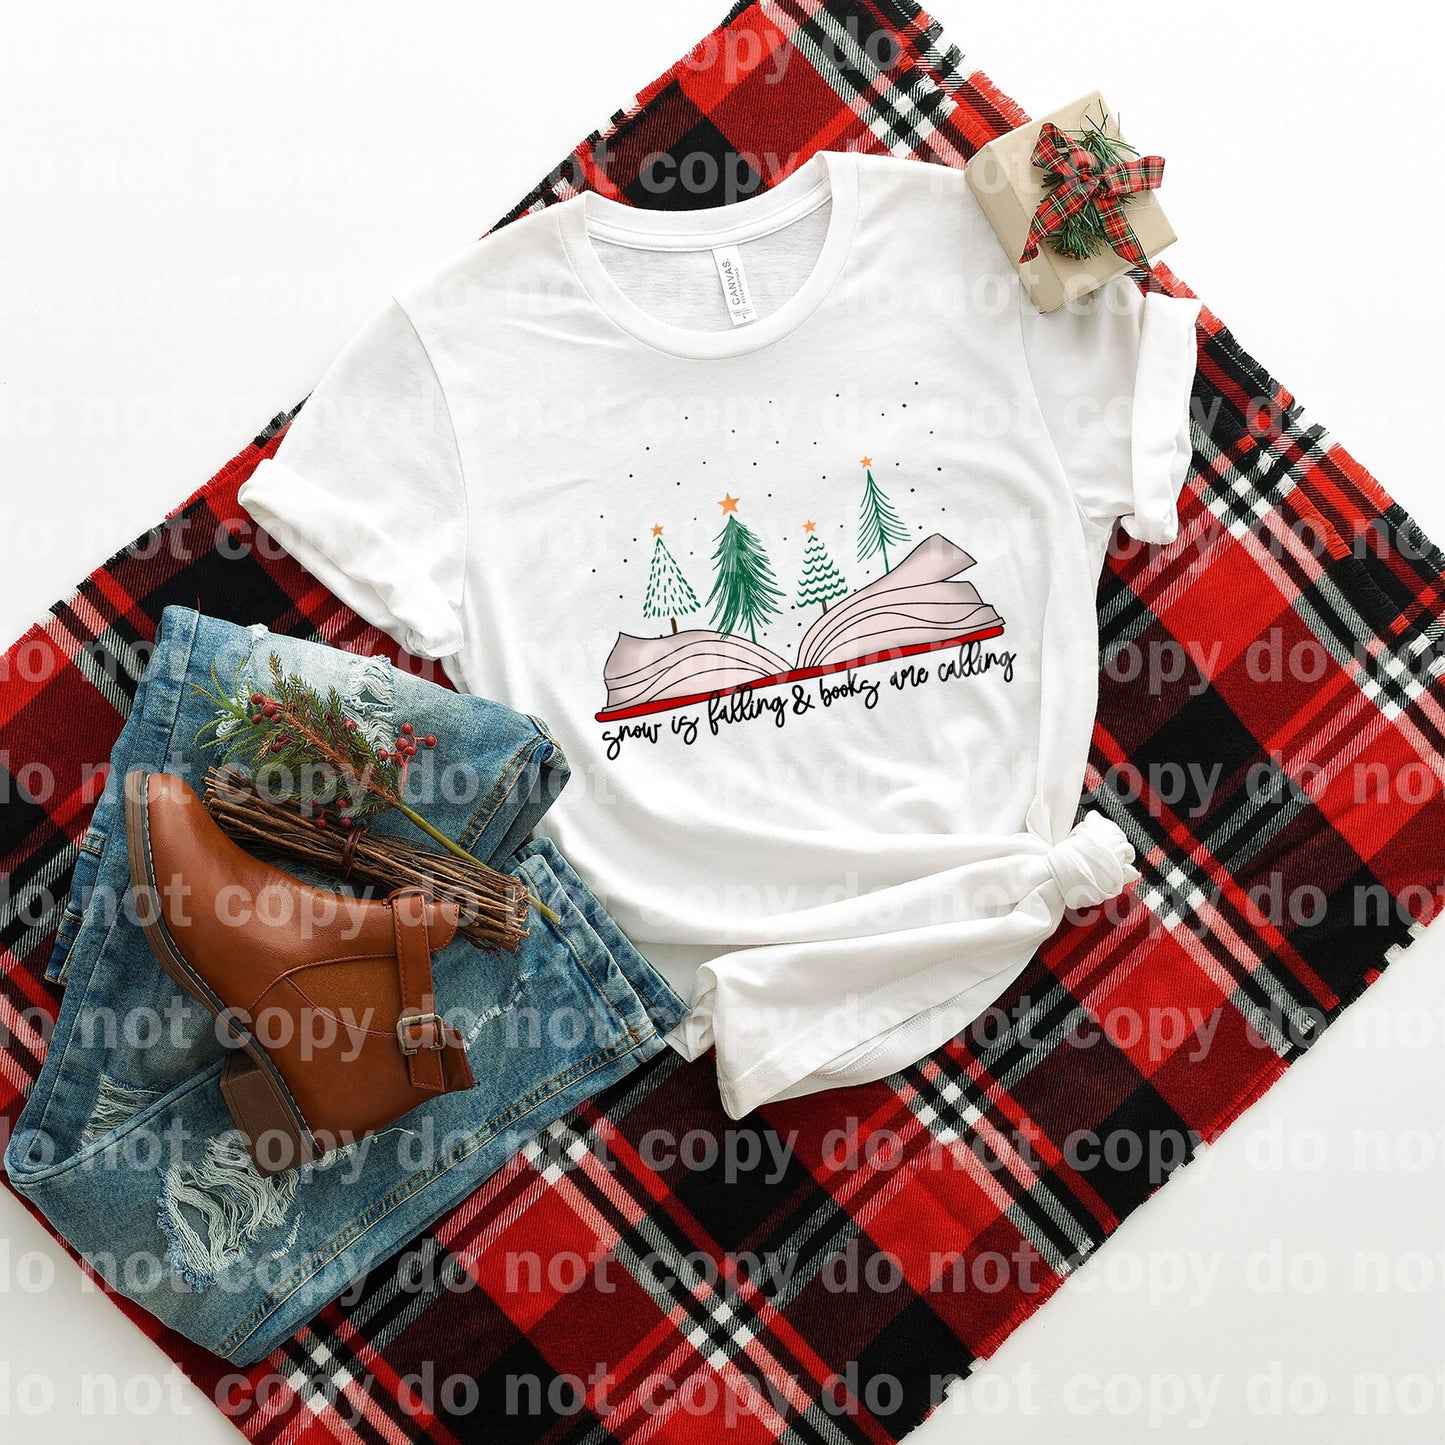 Snow Is Falling and Books Are Calling Full Color/One Color Dream Print or Sublimation Print